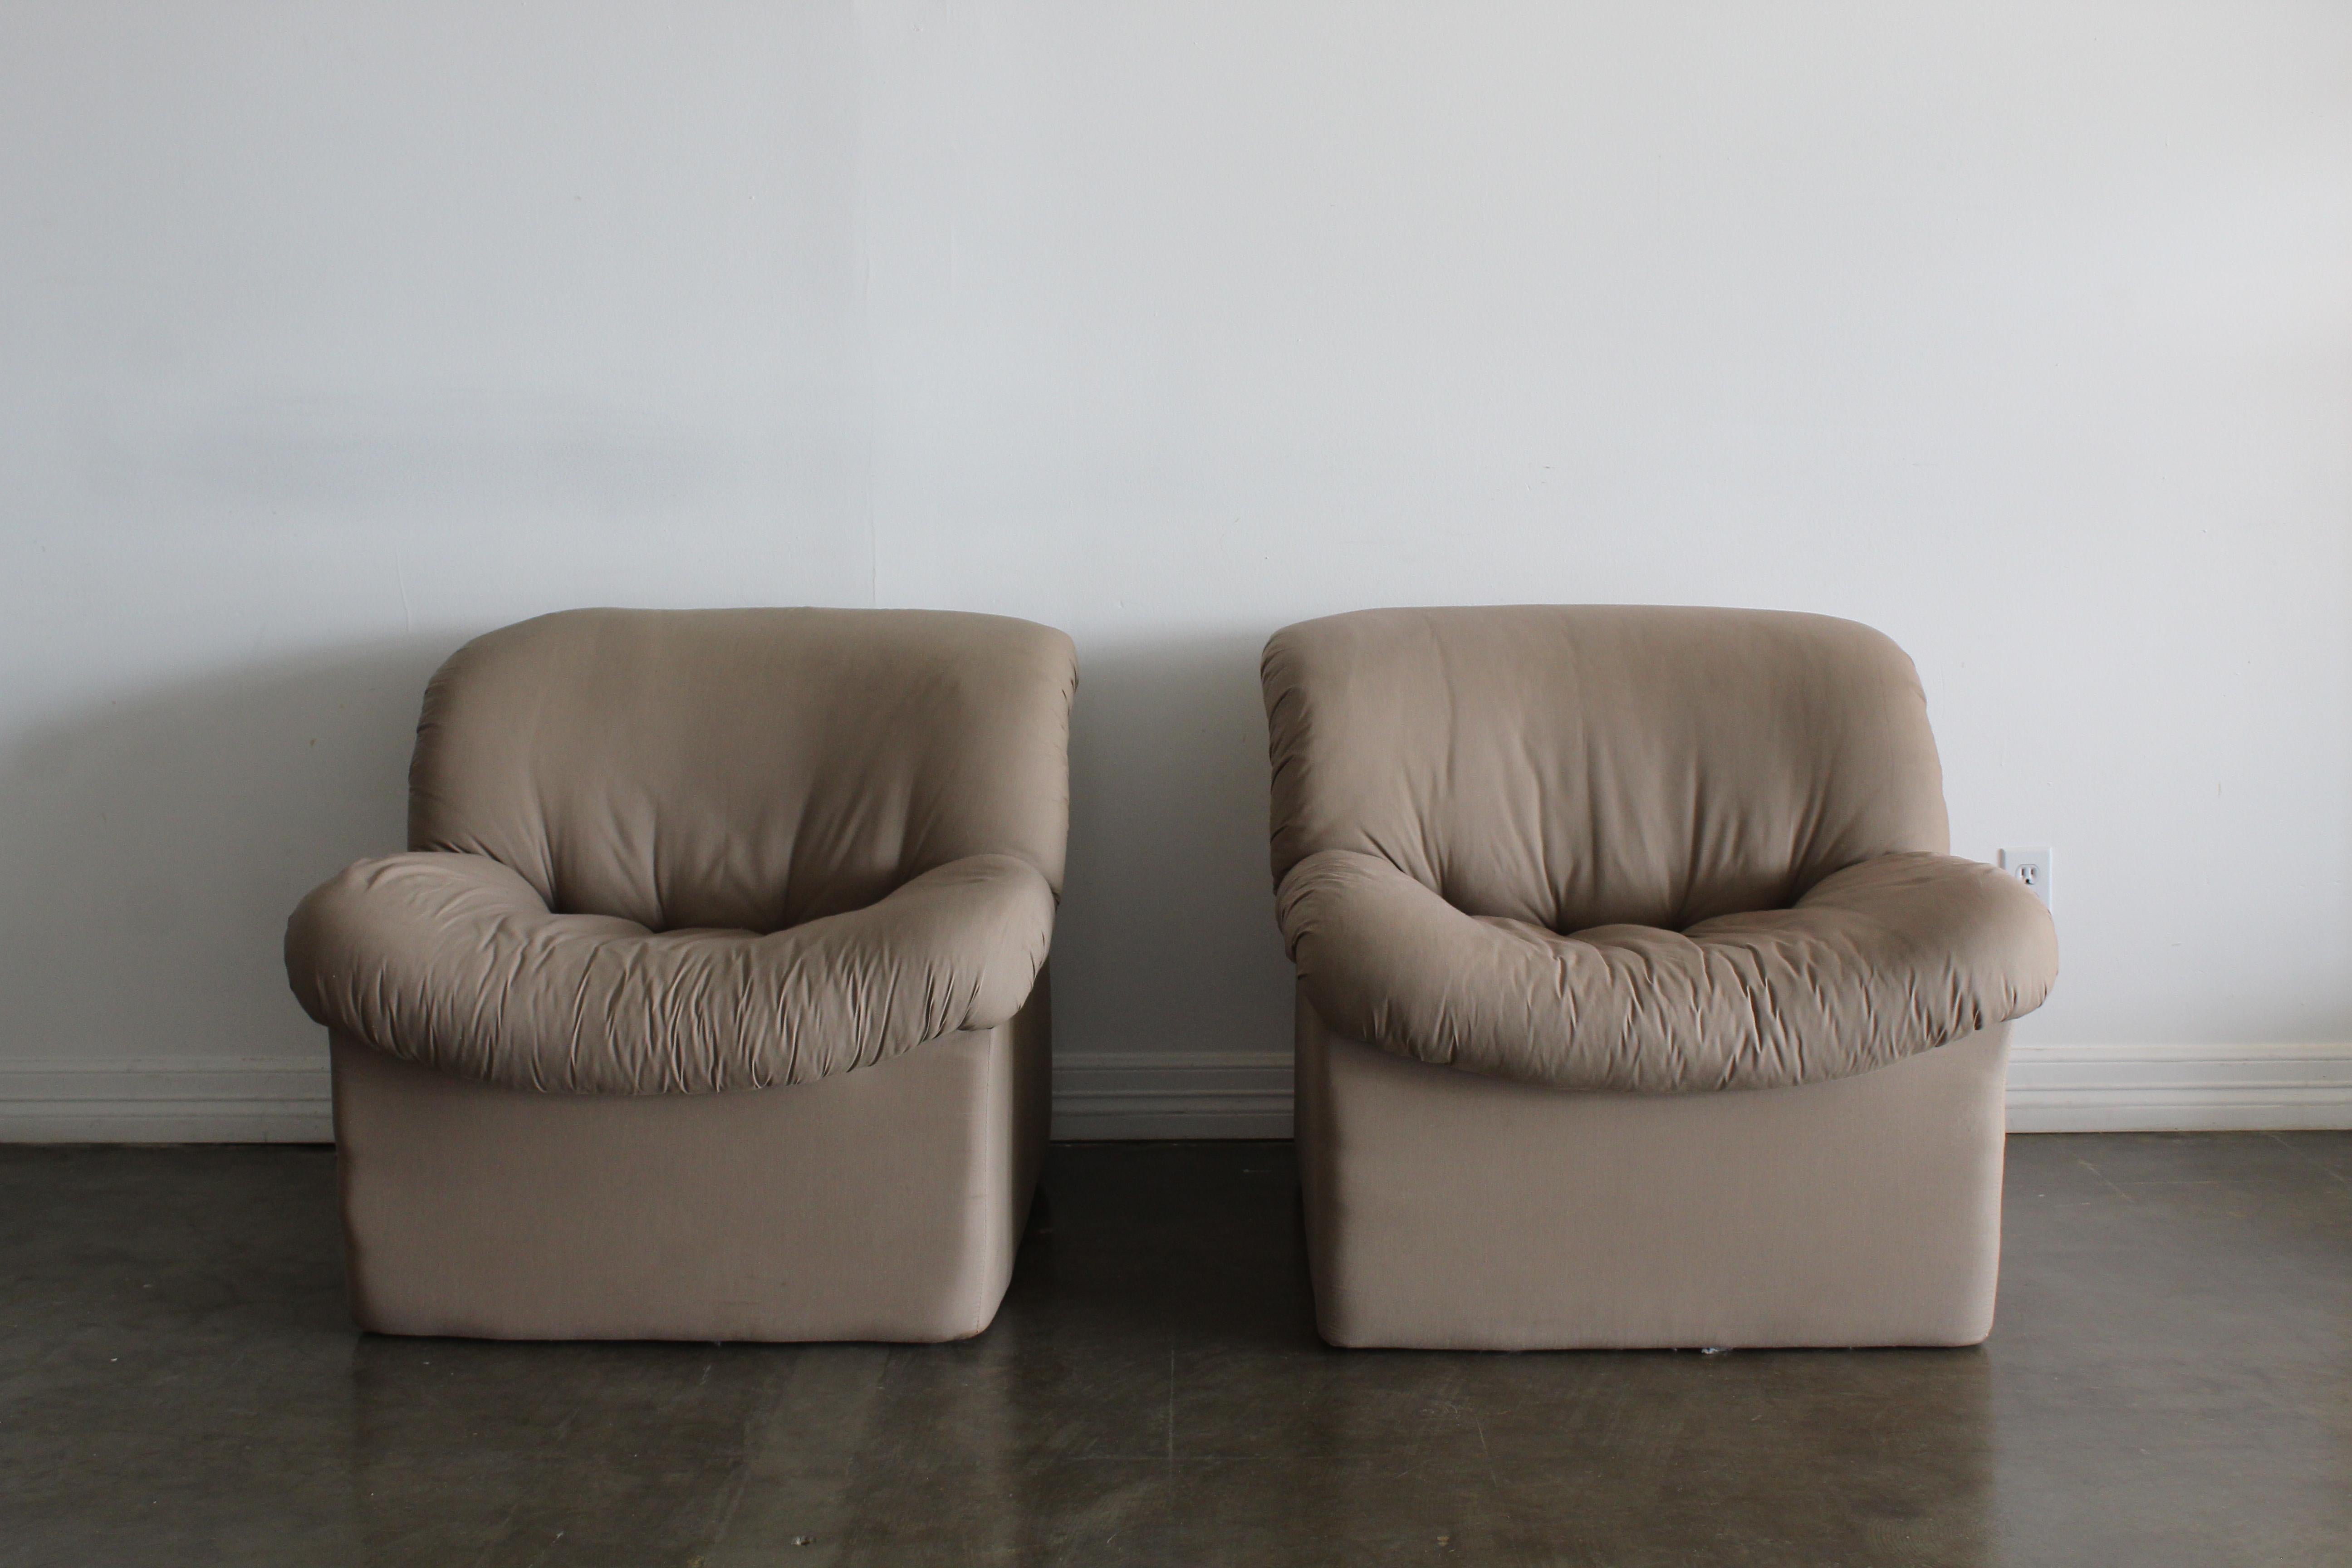 Milo Baughman style lounge chairs in a light tan fabric. Pieces are from the postmodern era, very light weight in a foam style material. super soft and comfortable! A great addition to any space.